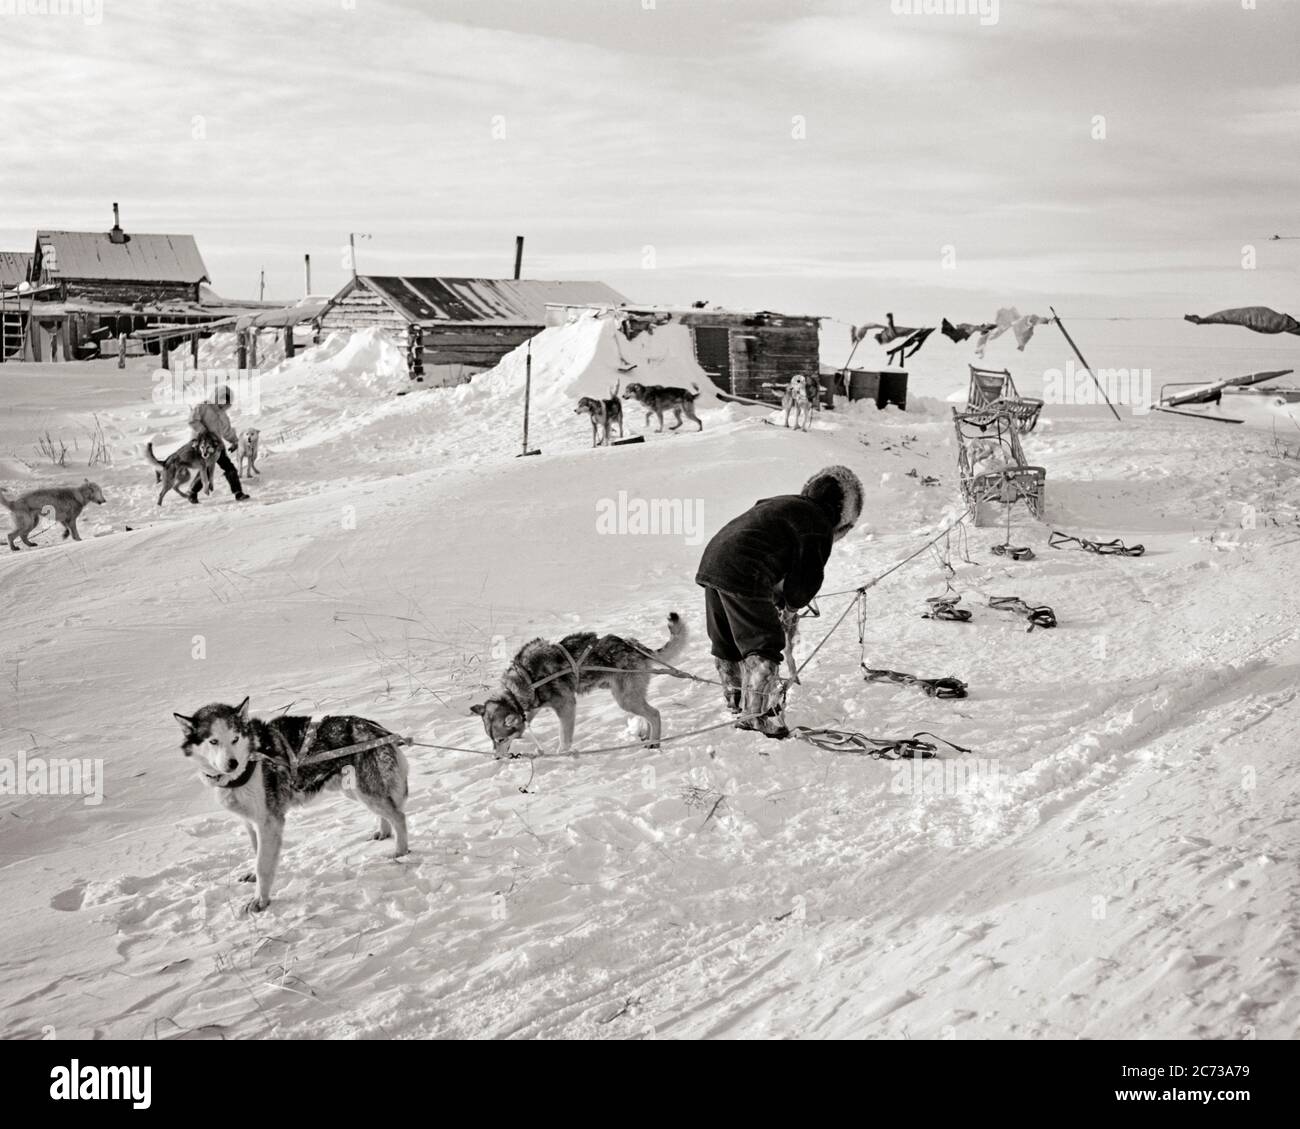 1950s NATIVE AMERICAN INDIAN MEN HITCHING UP MALAMUTE Canis lupus familiaris DOG TEAMS TO SLEDS KOTZEBUE NORTH OF NOME ALASKA - r3906 HAR001 HARS B&W NORTH AMERICA WINTERTIME NORTH AMERICAN ALASKA MAMMALS HIGH ANGLE ADVENTURE CANINES UP HOMES POOCH CONNECTION INUIT BREED HITCHING KOTZEBUE NATIVE AMERICAN CLOTHES LINE MALAMUTE SUB-ARCTIC WINTERY CANINE CANIS LUPUS FAMILIARIS COOPERATION MAMMAL NATIVE AMERICANS NOME RESIDENCES SLED DOGS SLEDS TEAMS TOGETHERNESS ALASKAN BLACK AND WHITE HAR001 INDIGENOUS MILES OLD FASHIONED Stock Photo